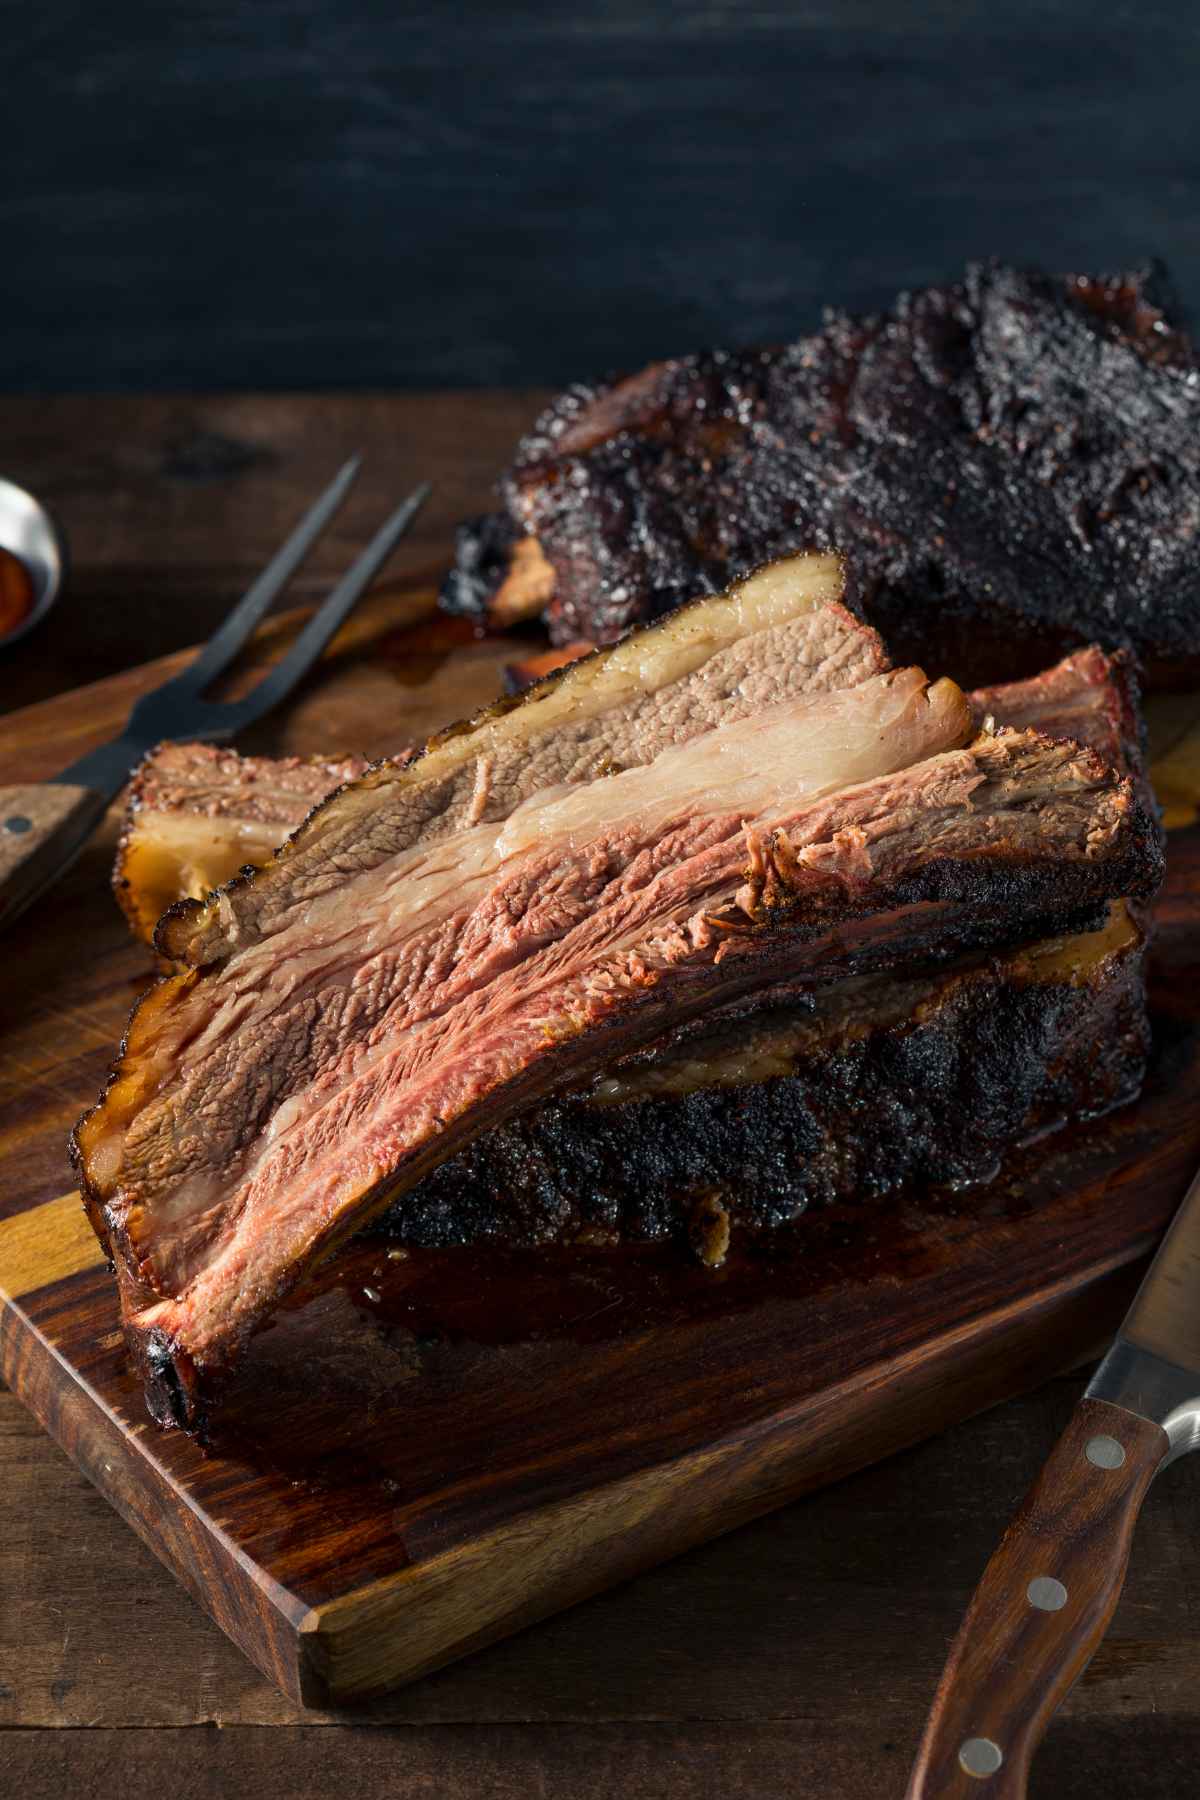 Not sure what’s the best temperature to smoke your ribs? Or what is the right internal temperature for smoked ribs? You’ve come to the right place. We’ll answer these questions, and in addition, we’ll cover how long to smoke ribs and tips for perfectly smoked ribs.